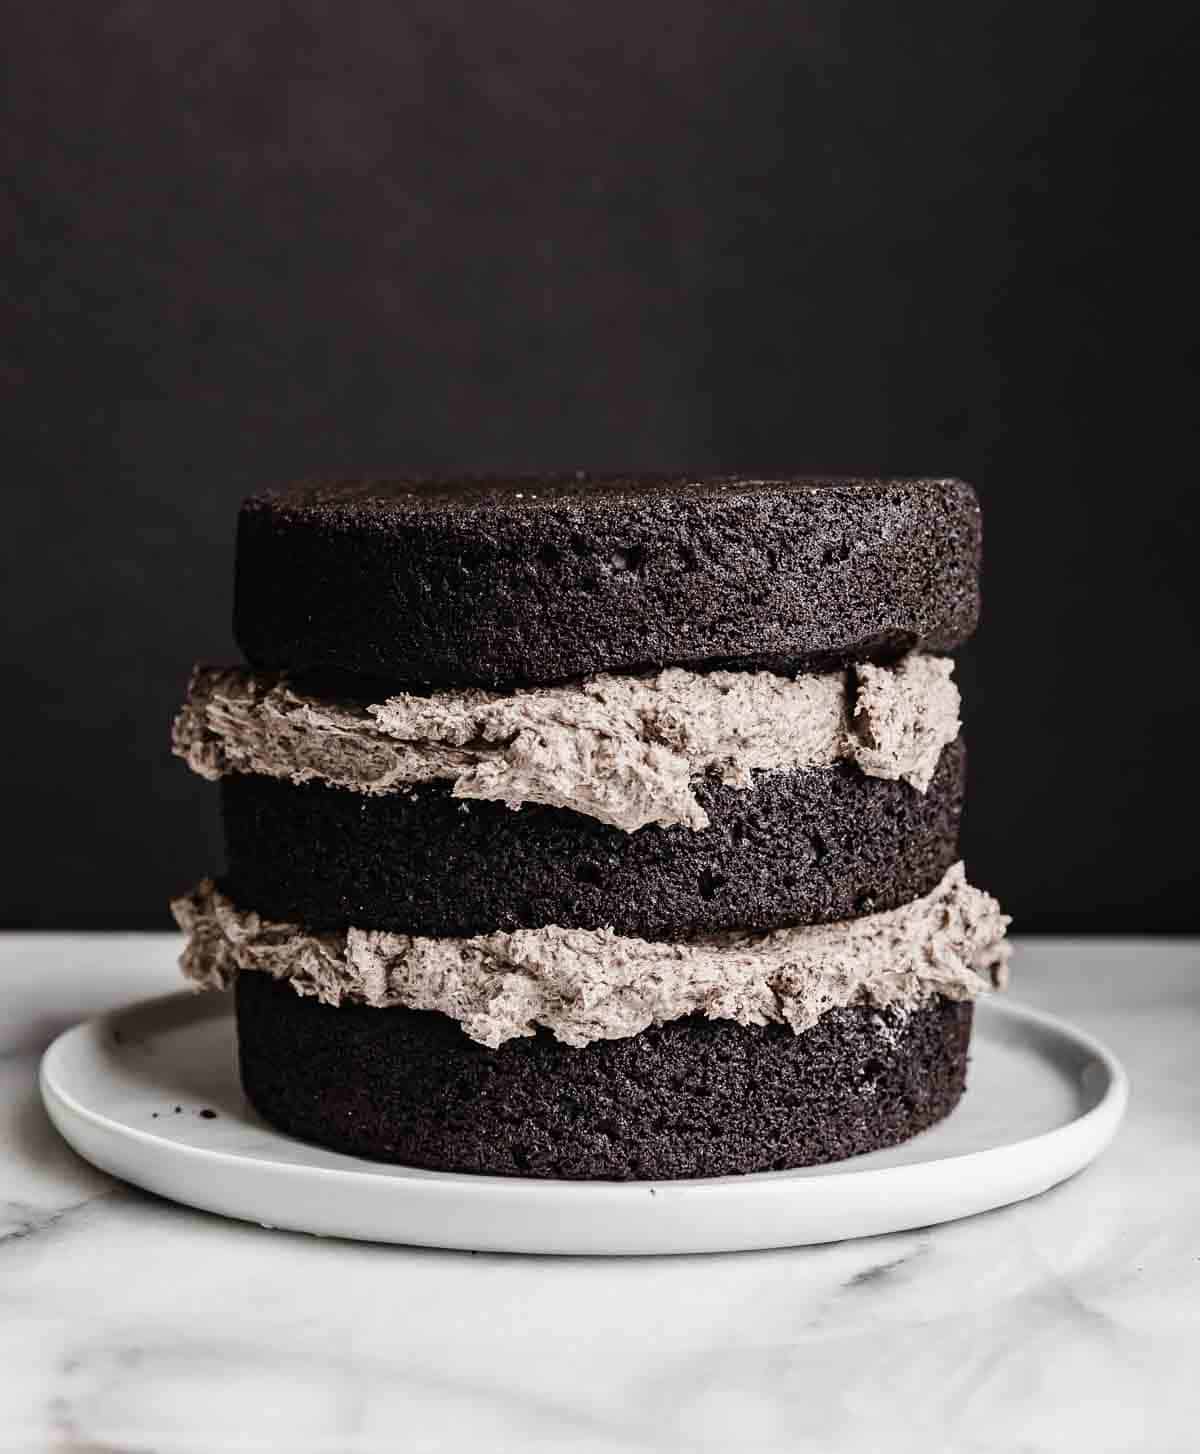 A three layer black cocoa cake with Oreo frosting between each cake layer, against a white background.